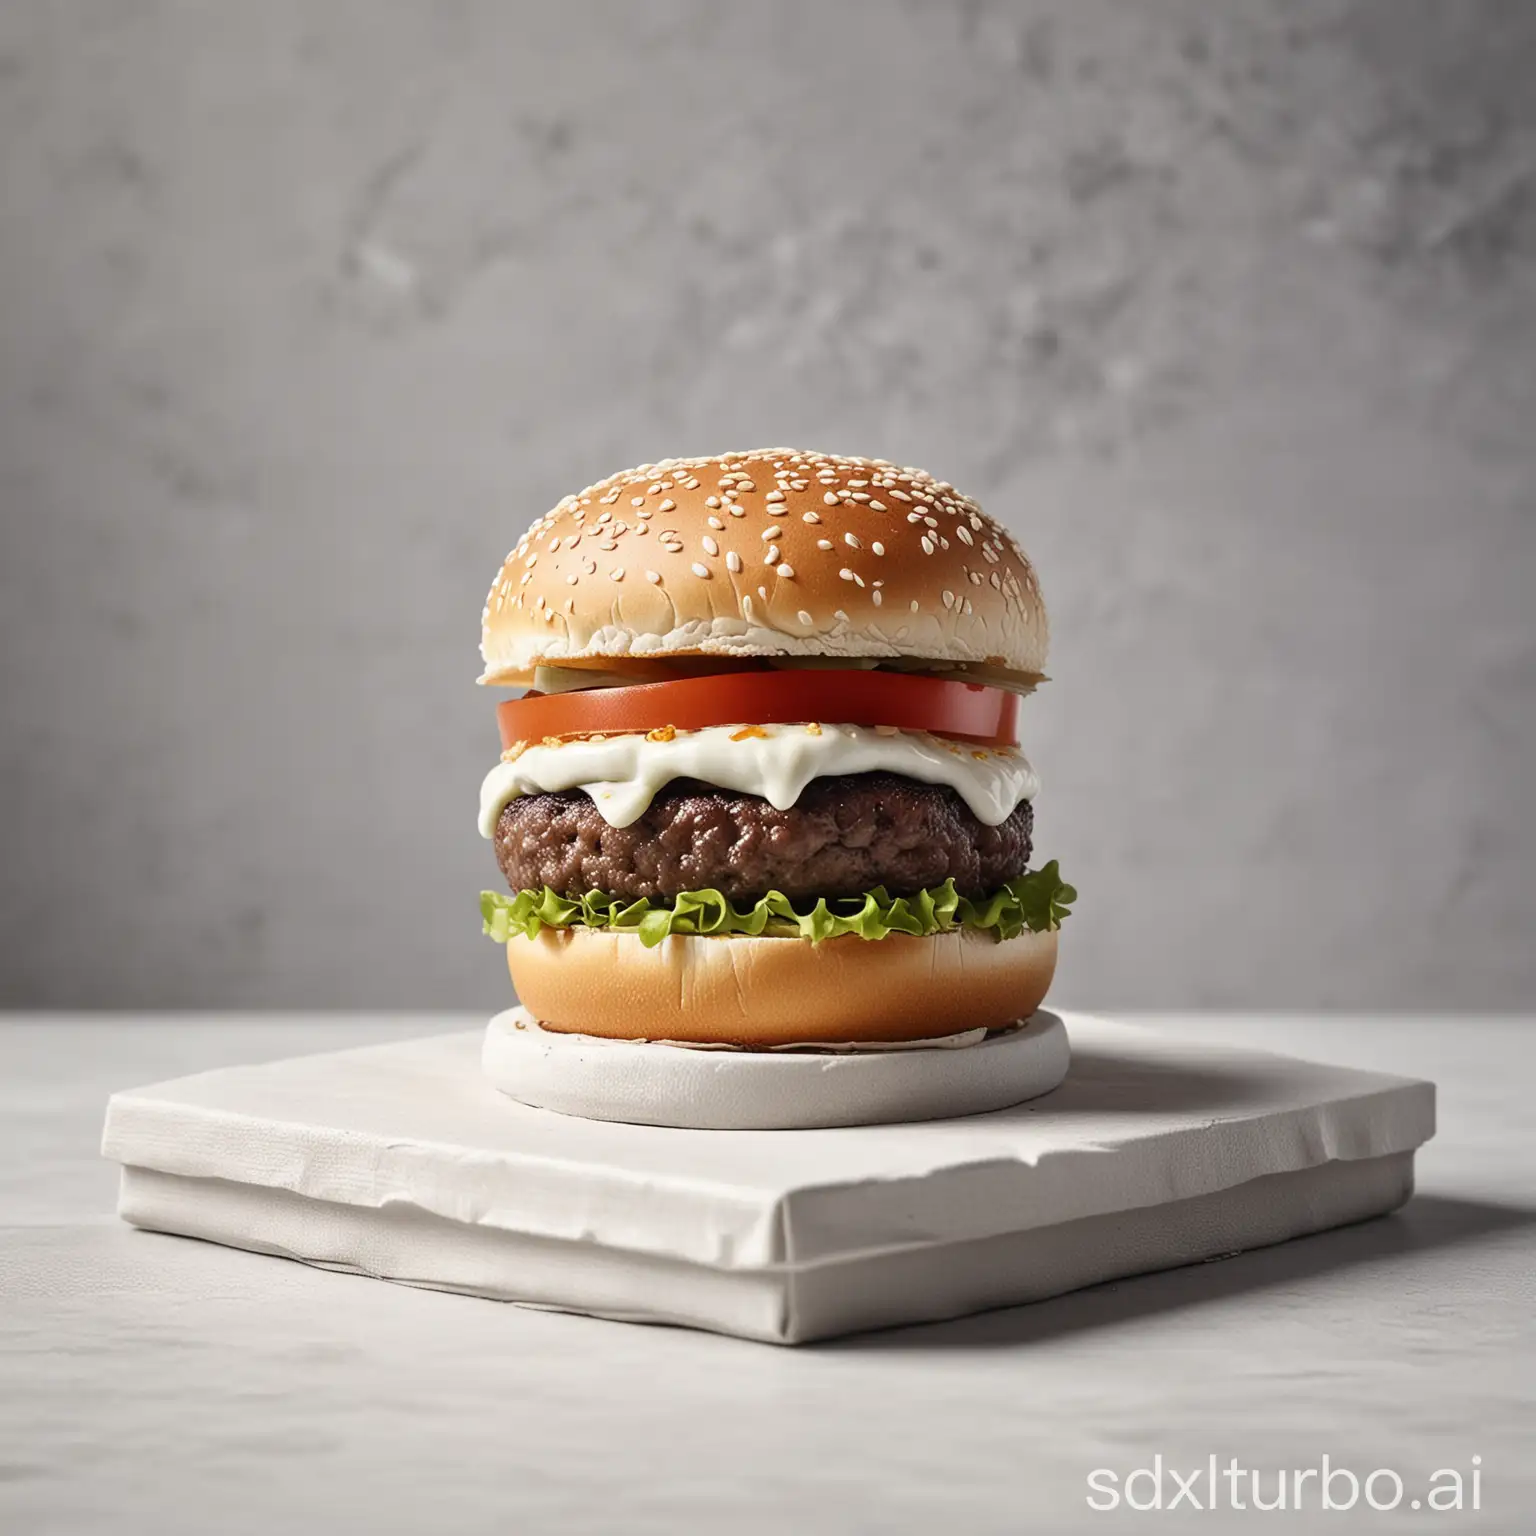 Hamburger in the style of split toning, porcelain, selective focus, unprimed canvas, gesture, natural minimalism, white and gray